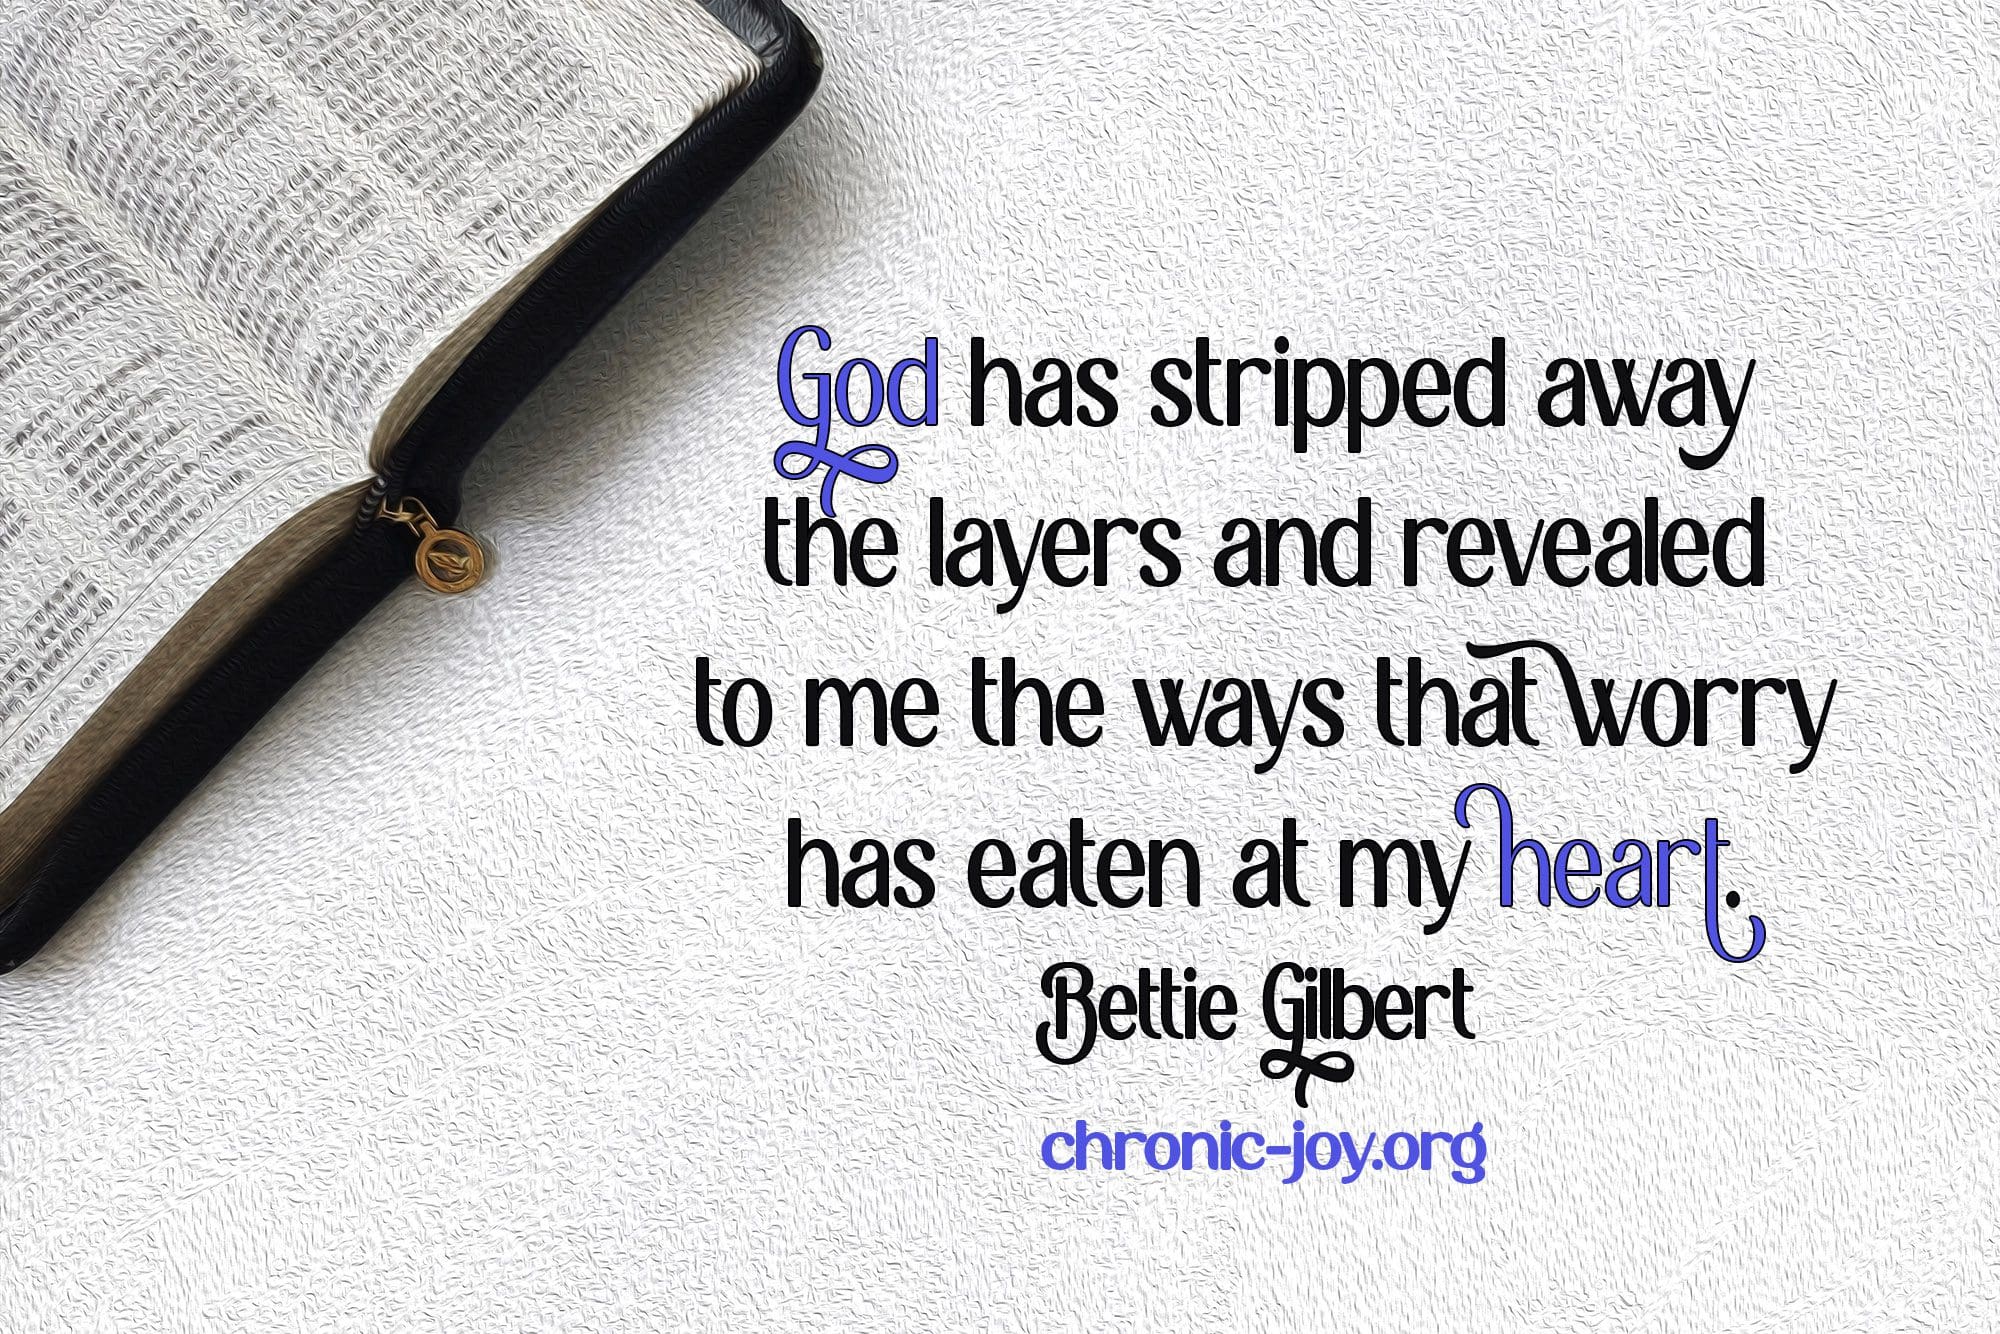 "God has stripped away the layers and revealed to me the ways that worry has eaten at my heart." Bettie Gilbert